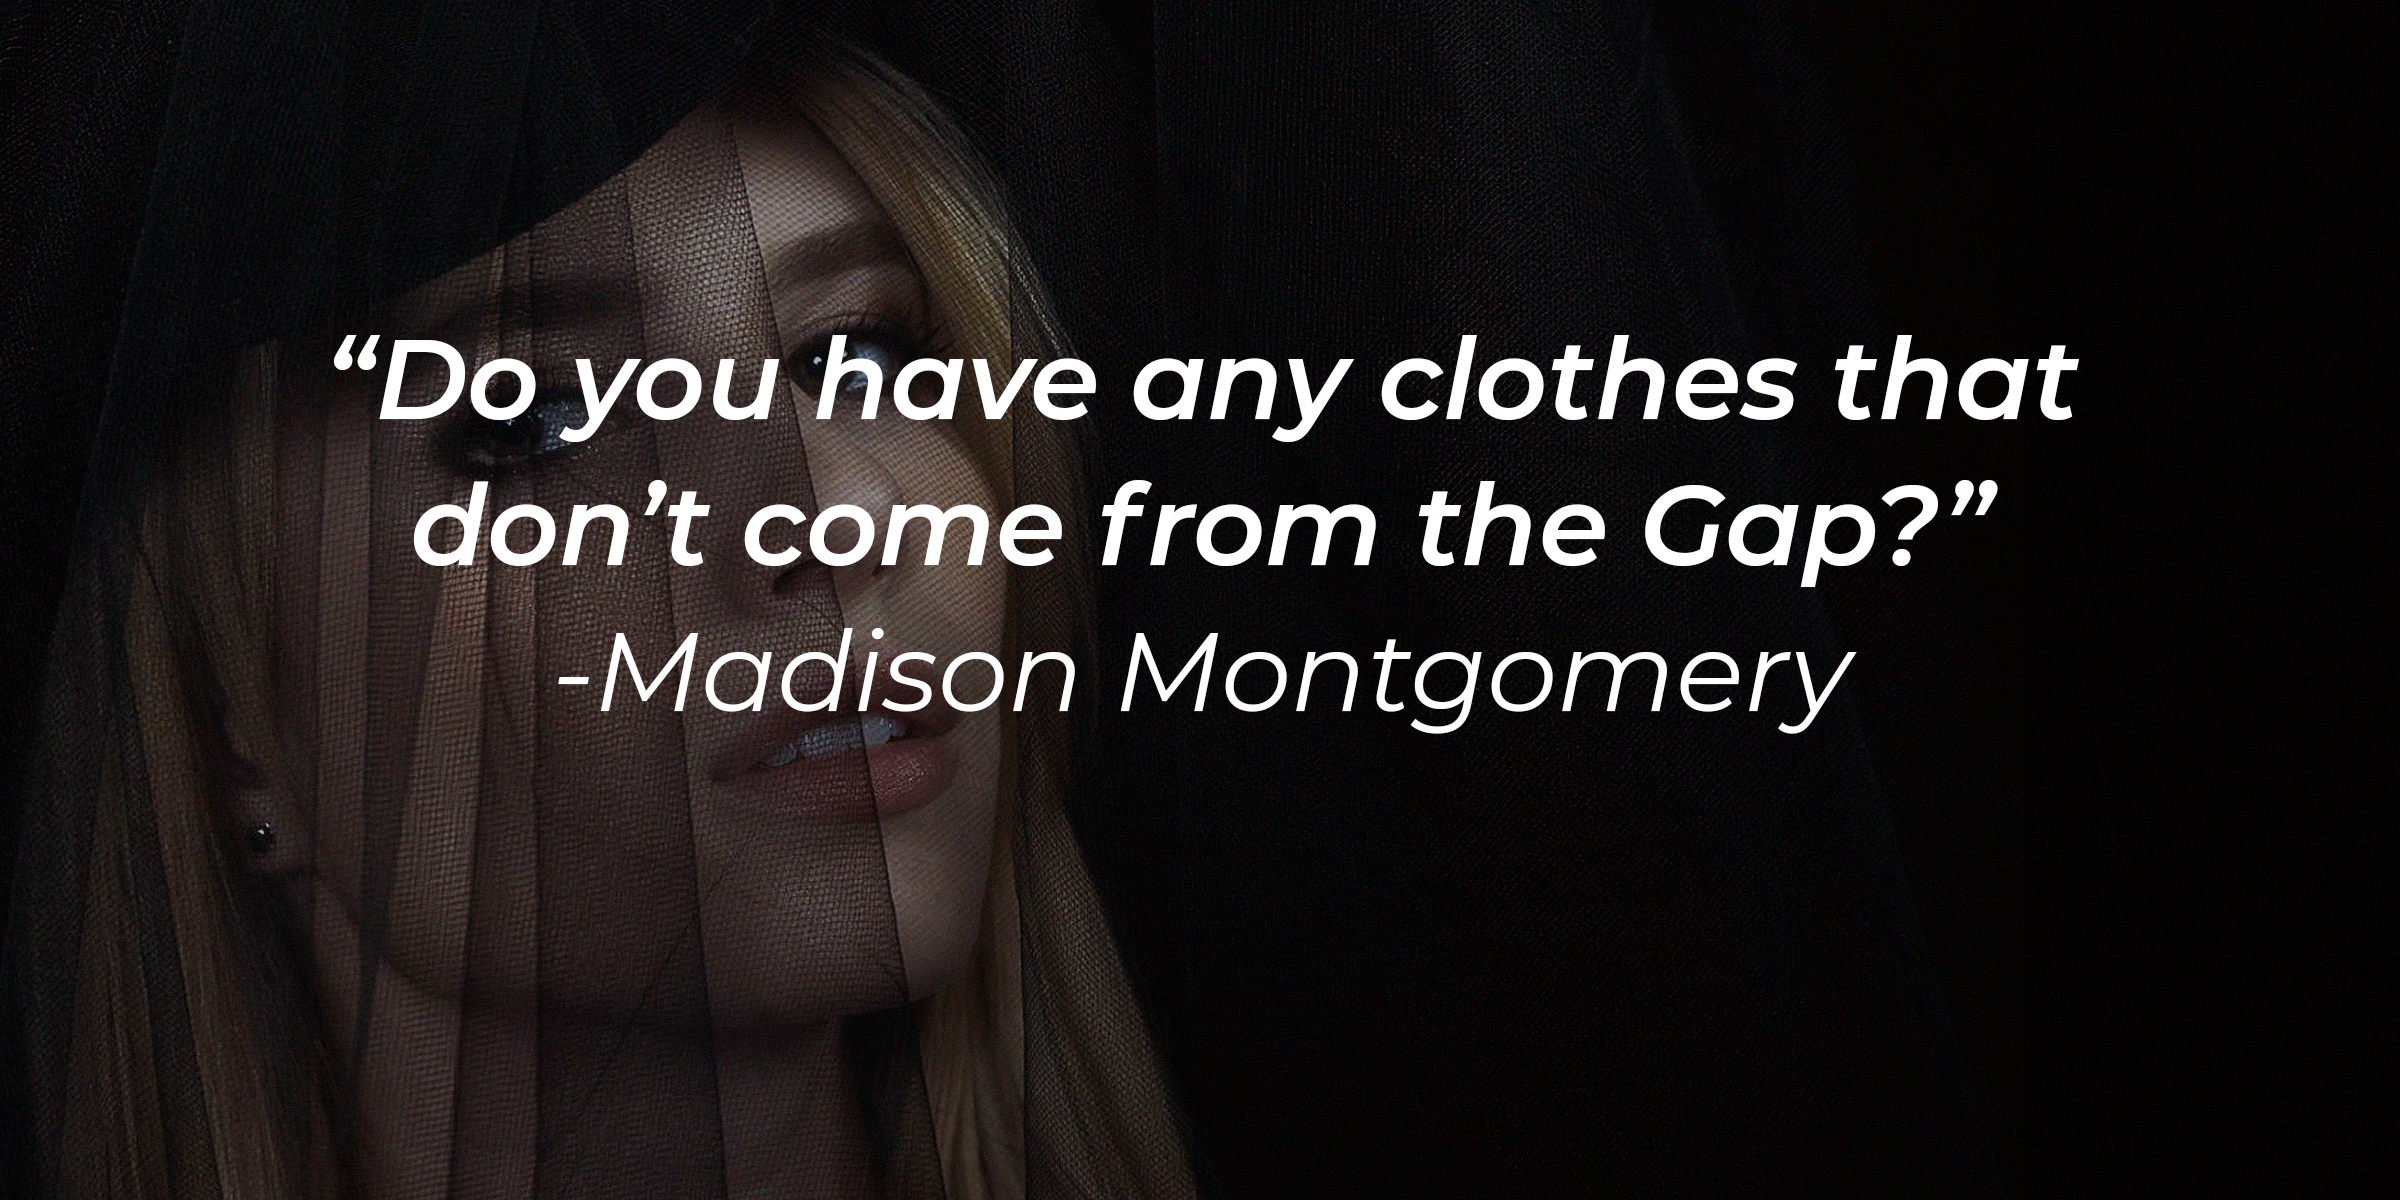 Madison's quote: “Do you have any clothes that don’t come from the Gap?” | Source: facebook.com/americanhorrorstory